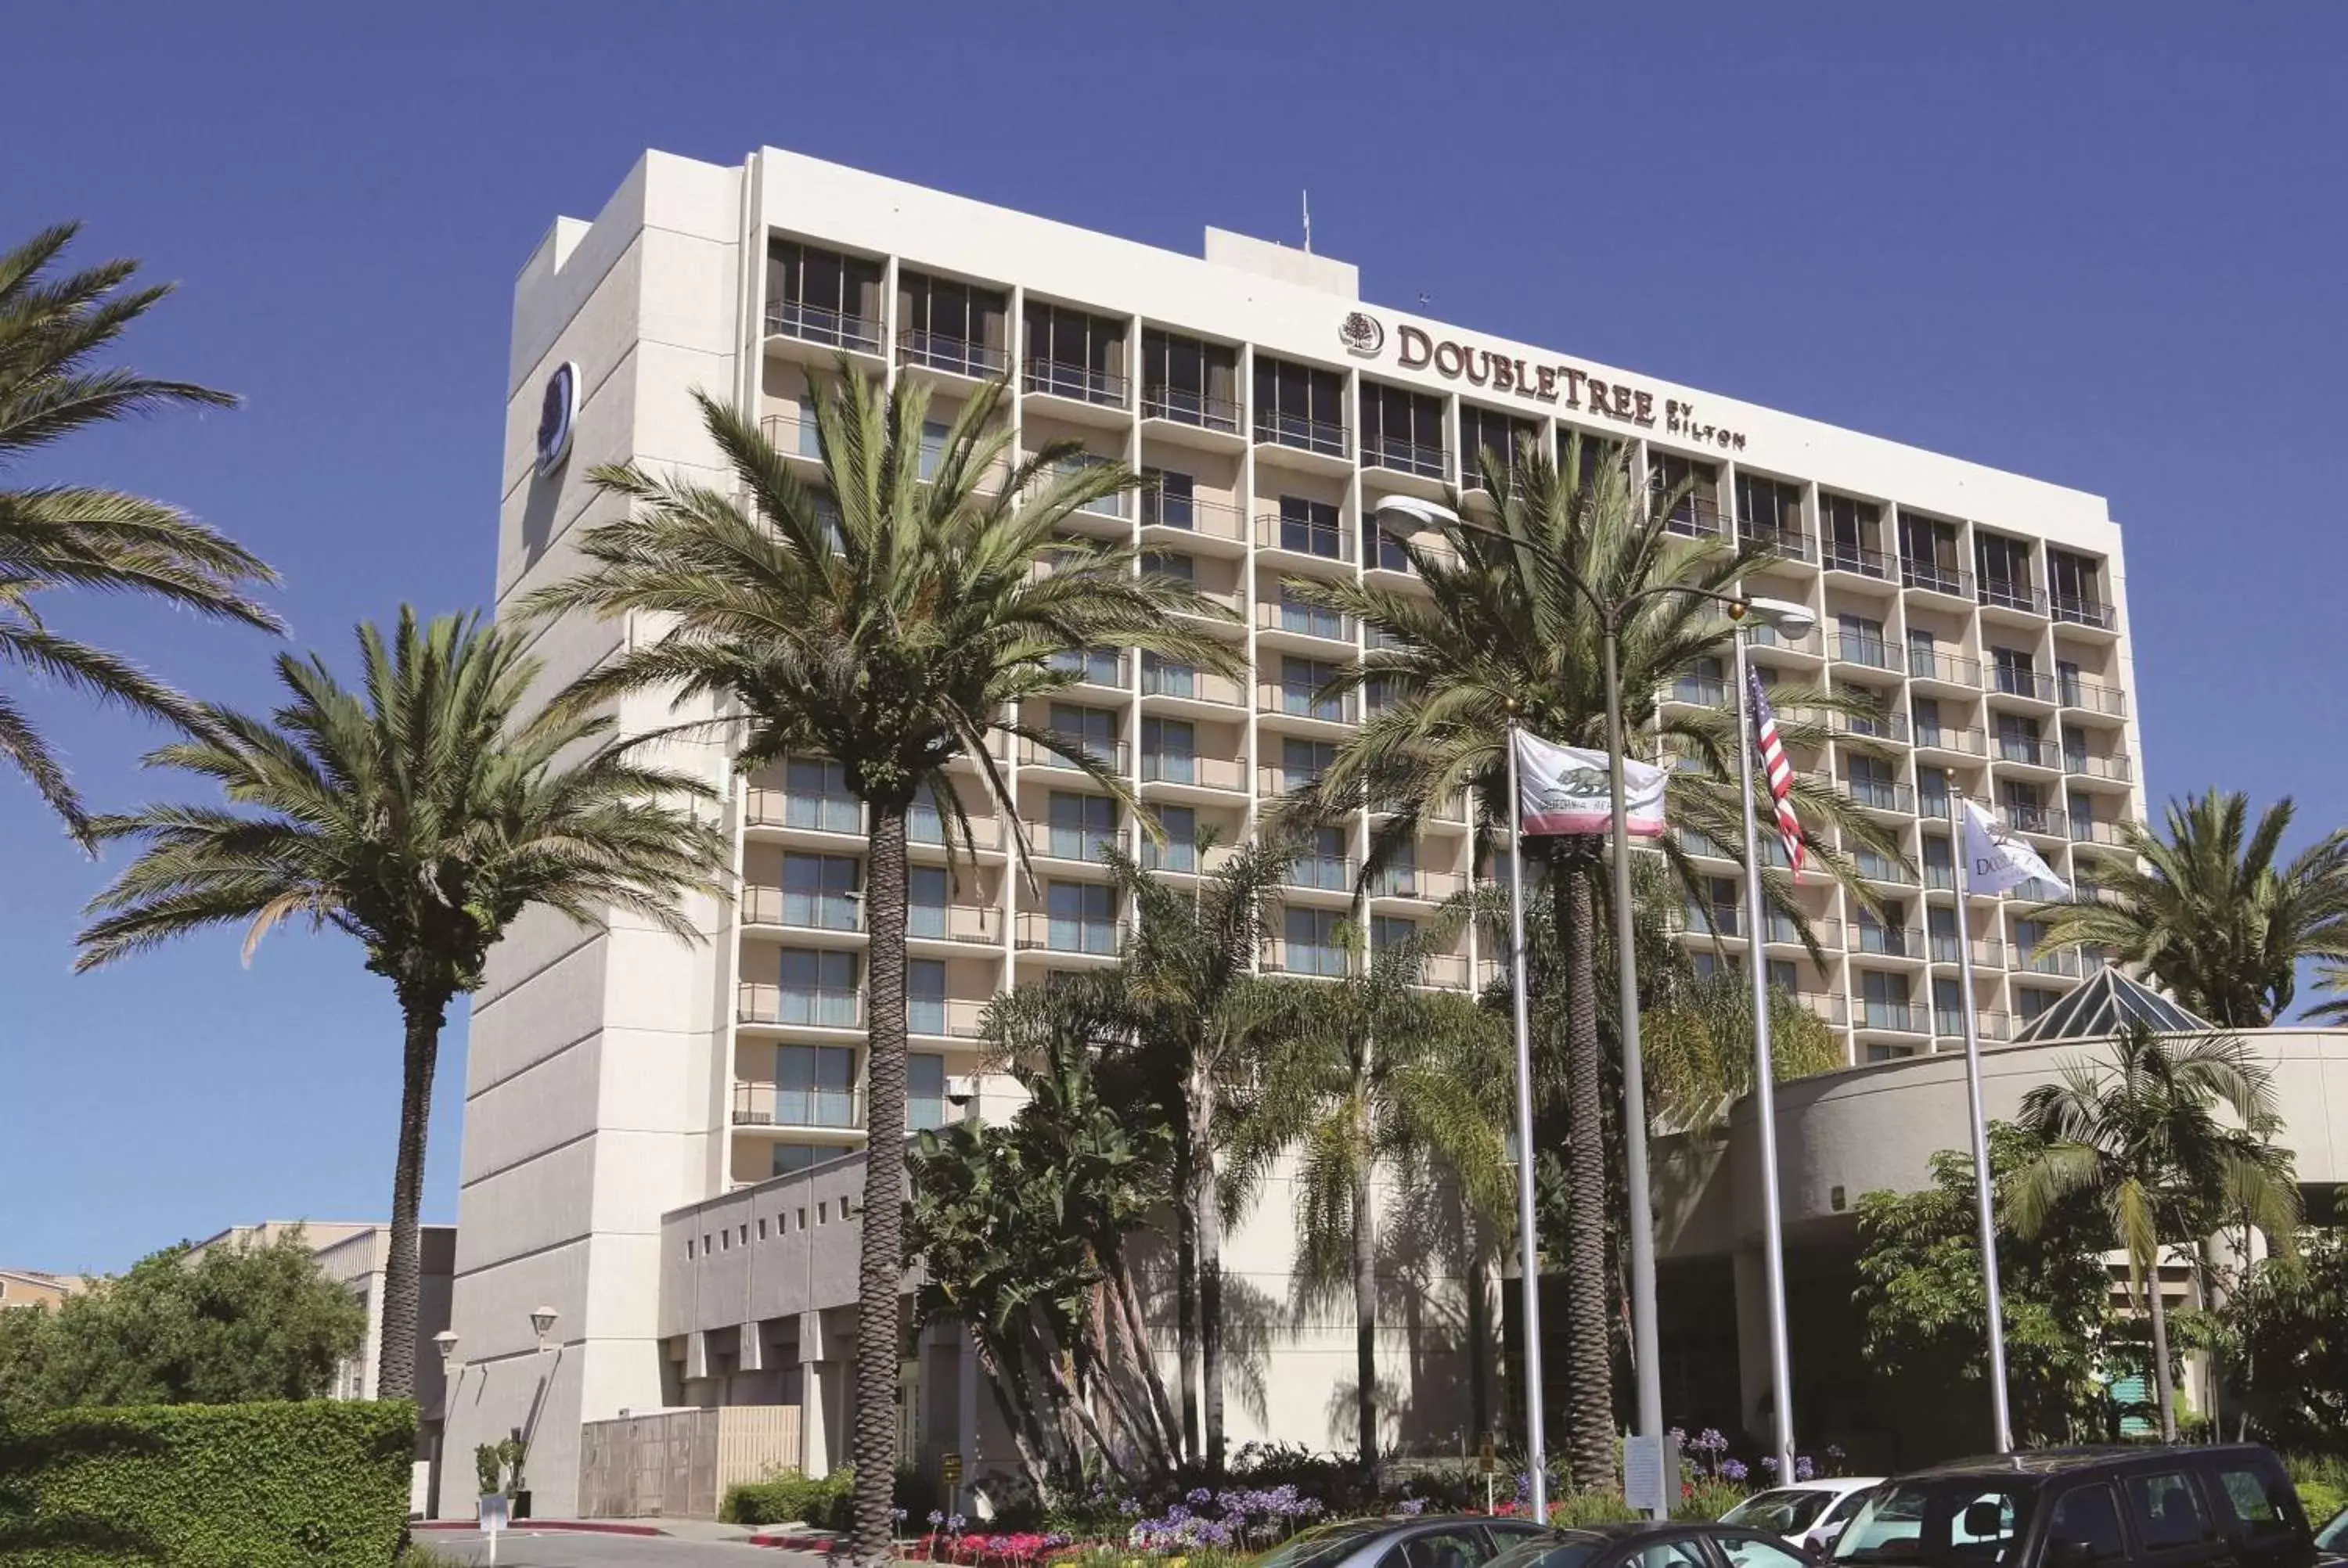 Property Building in DoubleTree by Hilton Torrance - South Bay